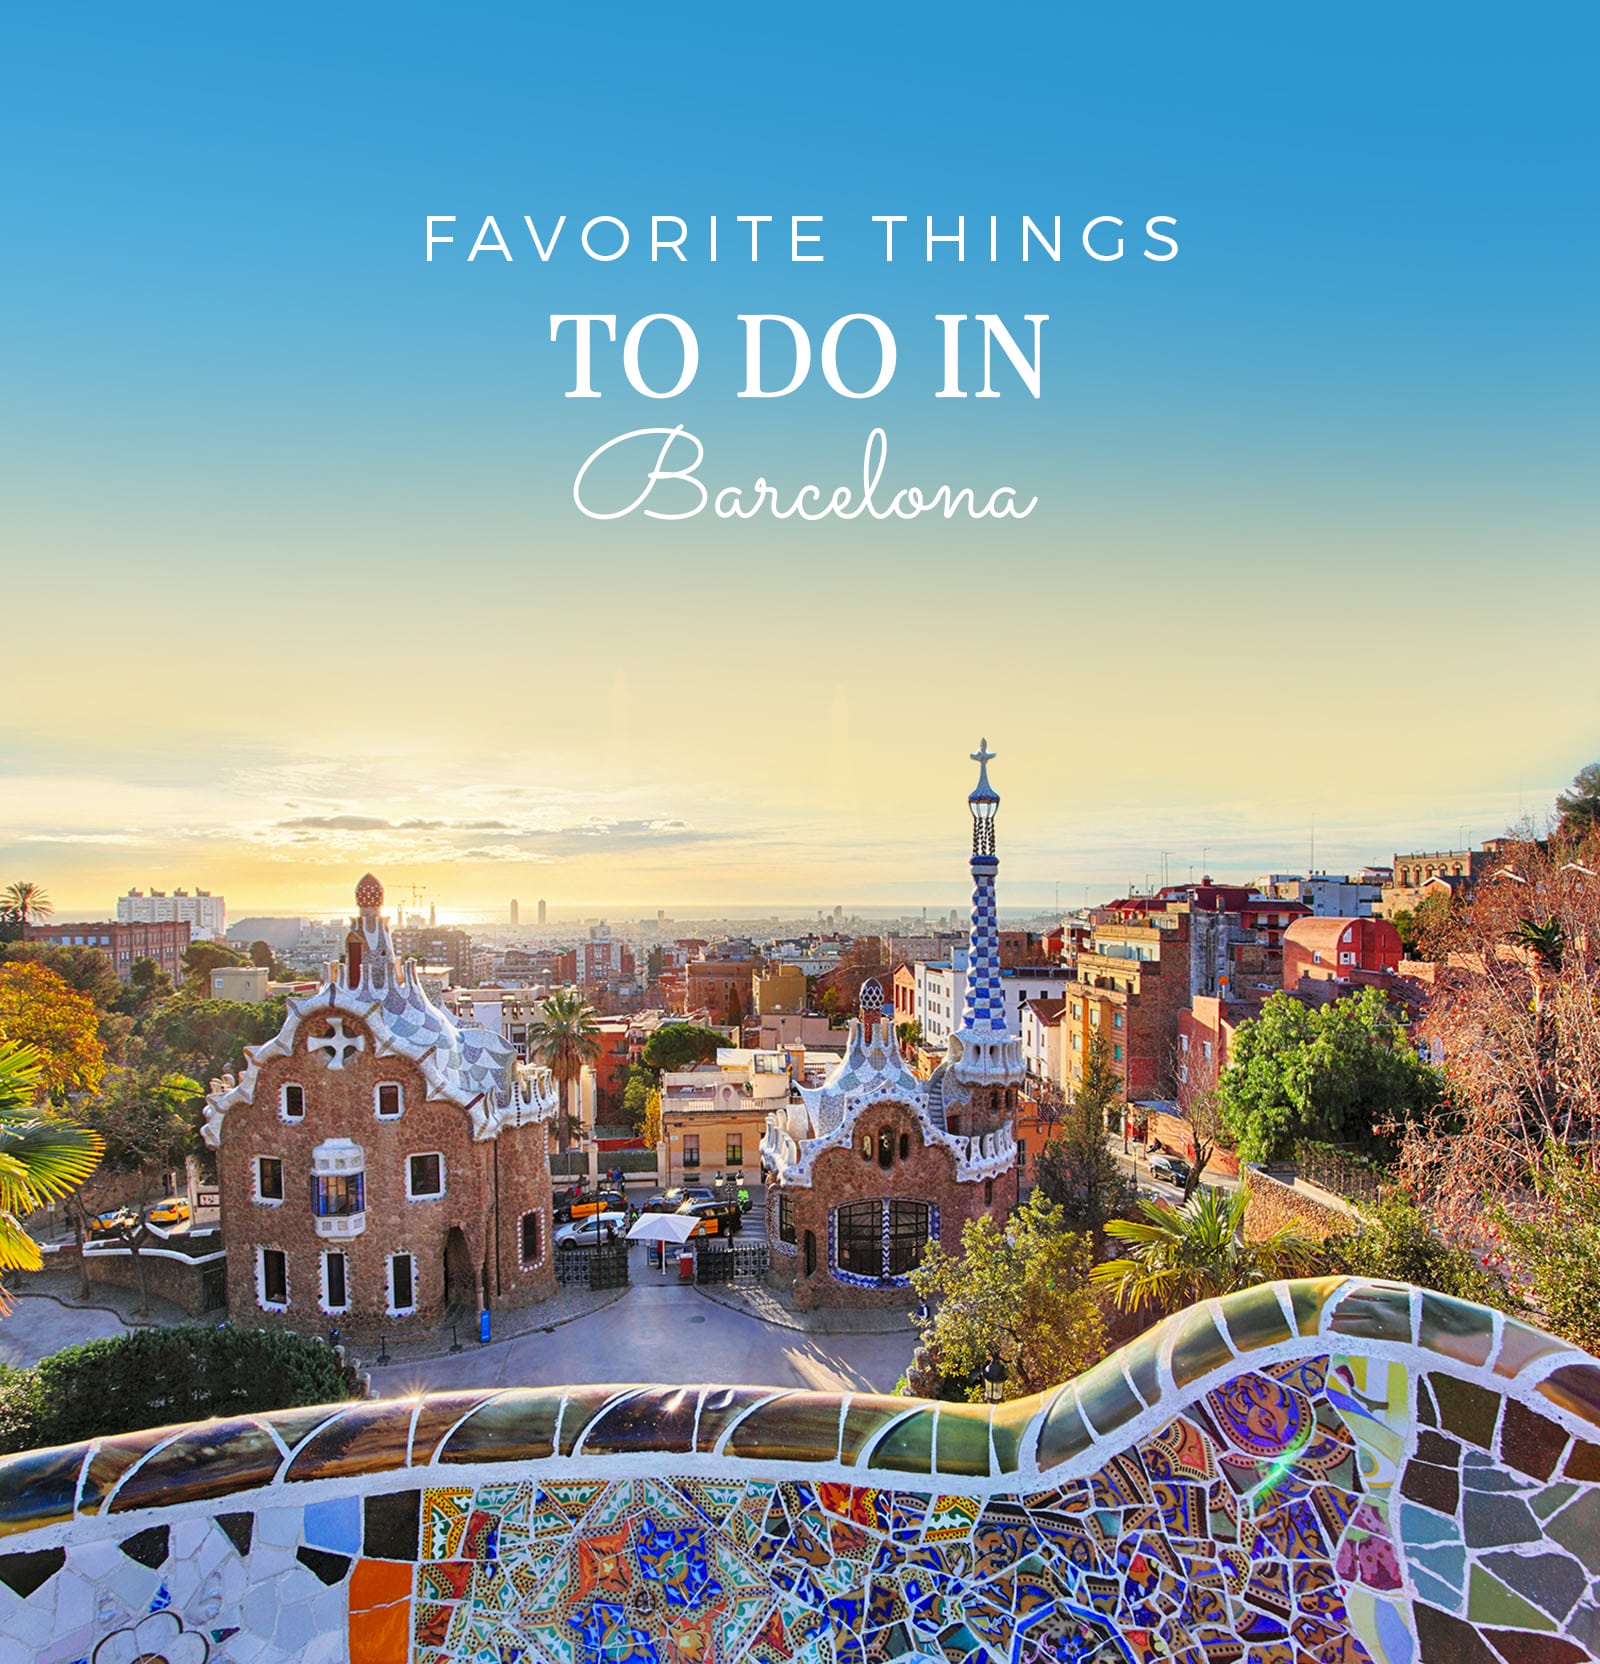 Favorite things to do in Barcelona